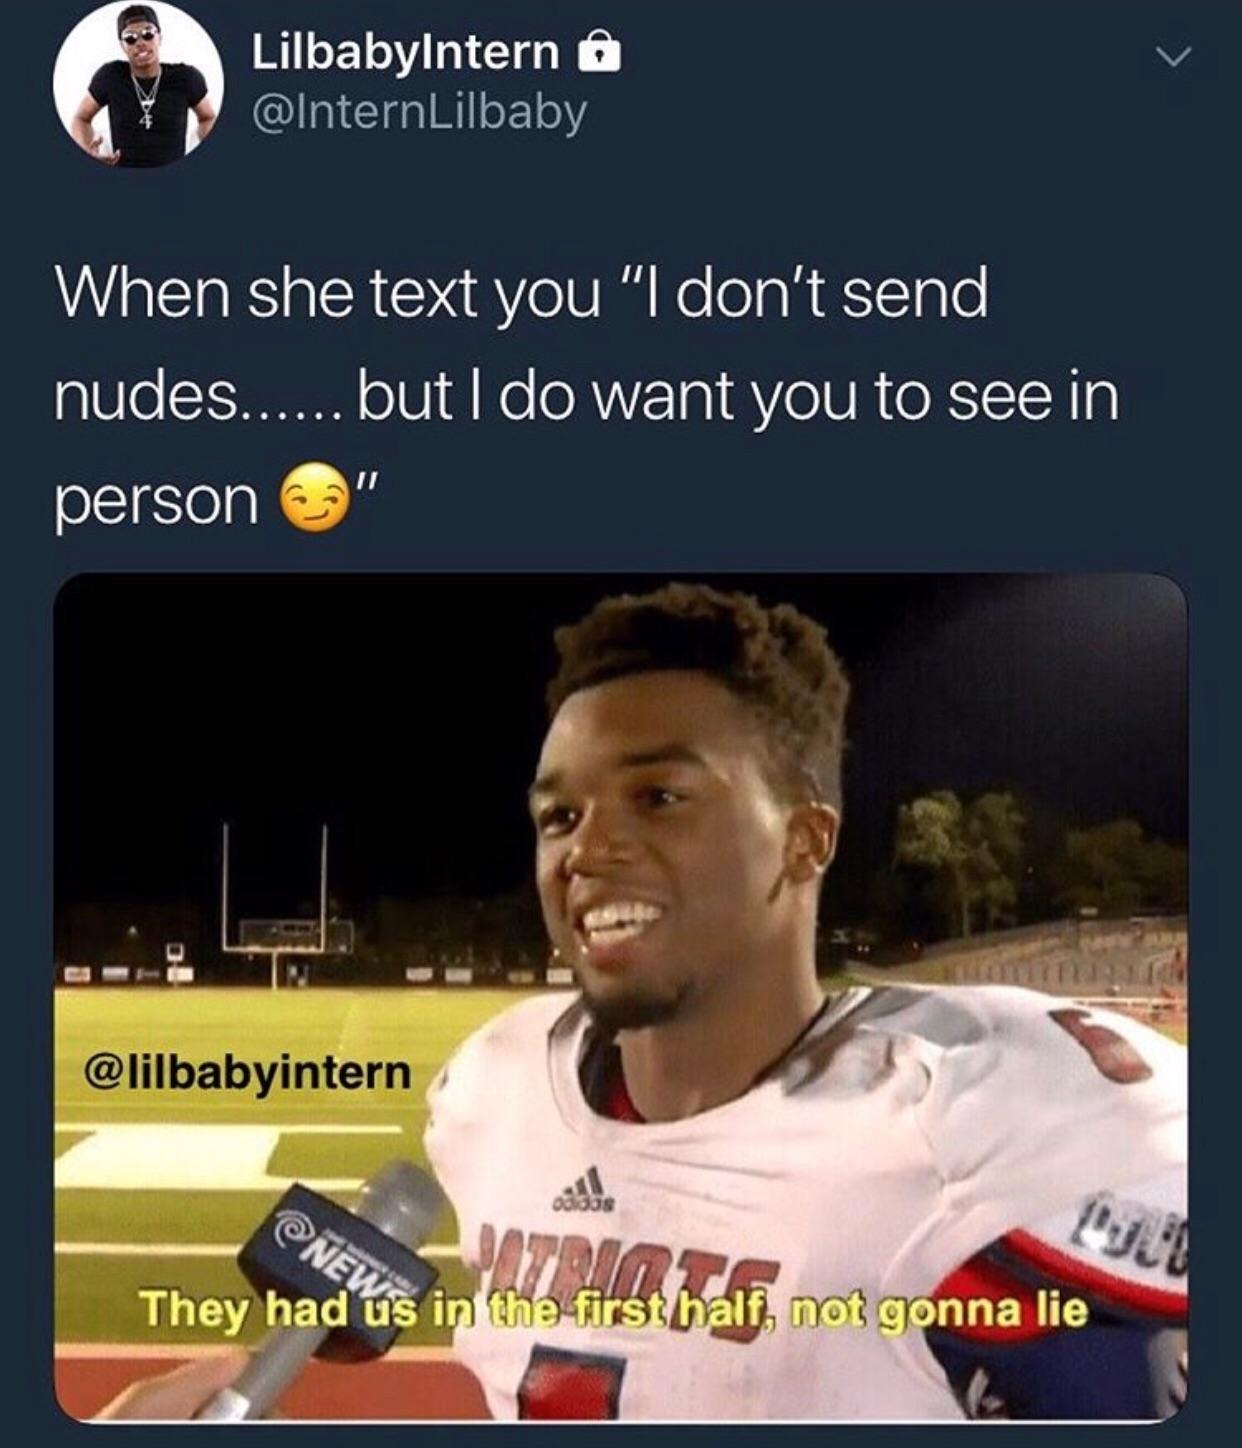 tweet - they had us in the first half not gonna lie - LilbabyIntern o When she text you "I don't send nudes...... but I do want you to see in person " Te They had us in the first half, not gonna lie